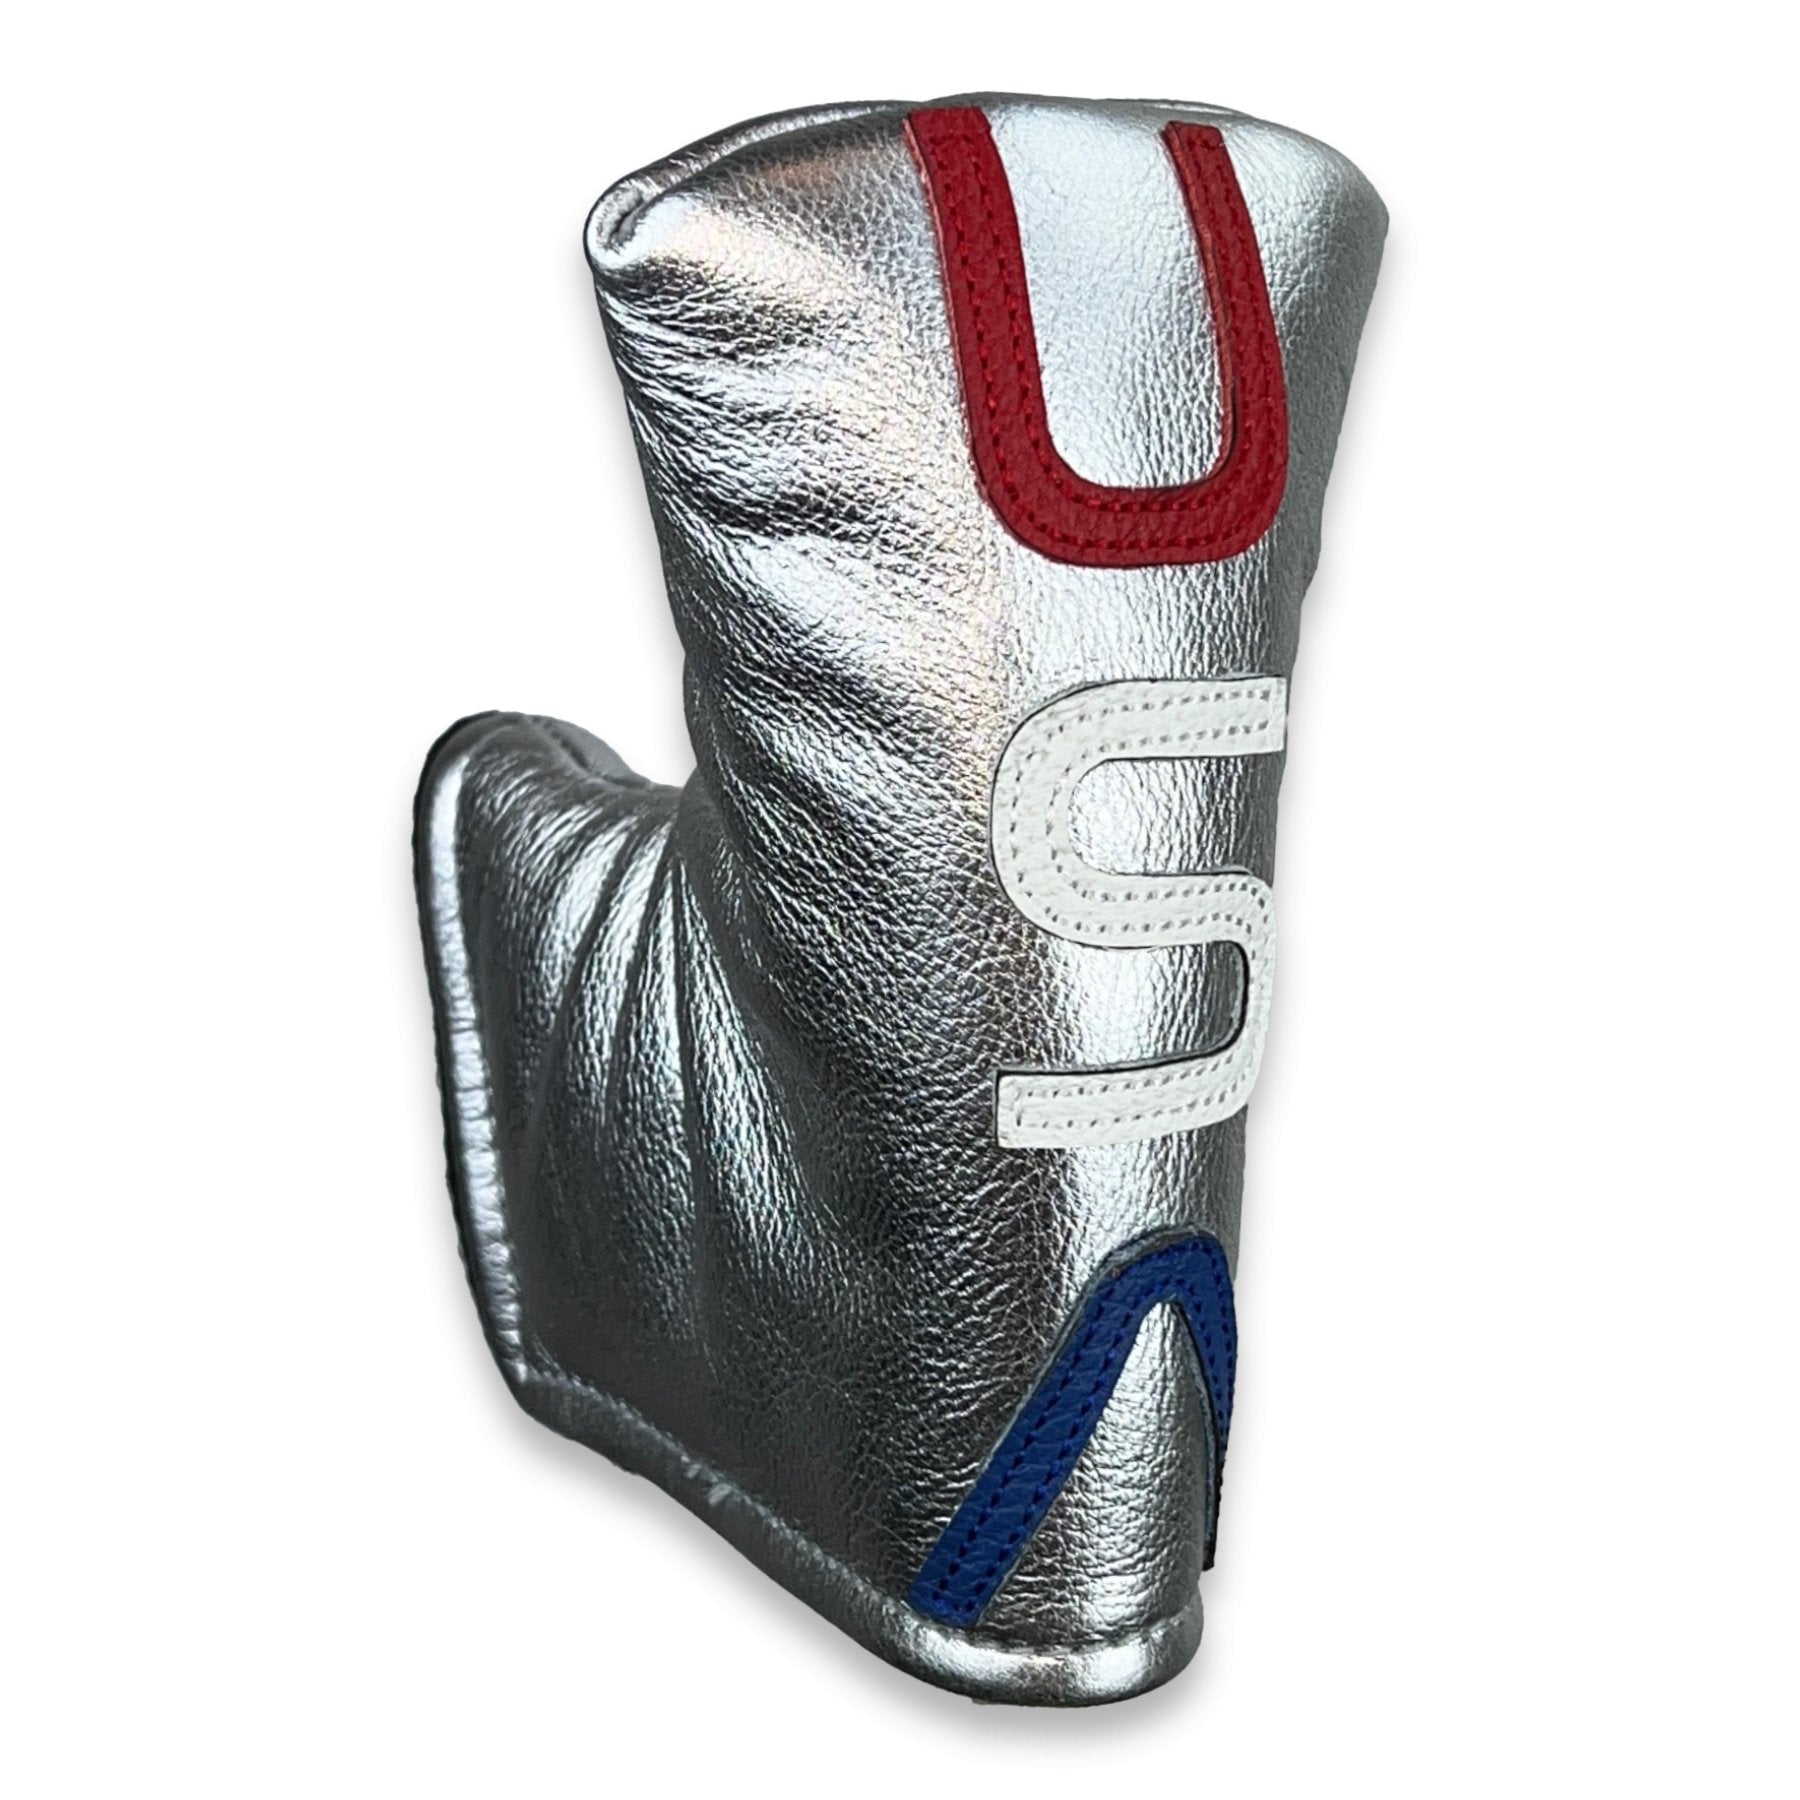 Spaceman Leather Putter Cover - Standard - Velcro -